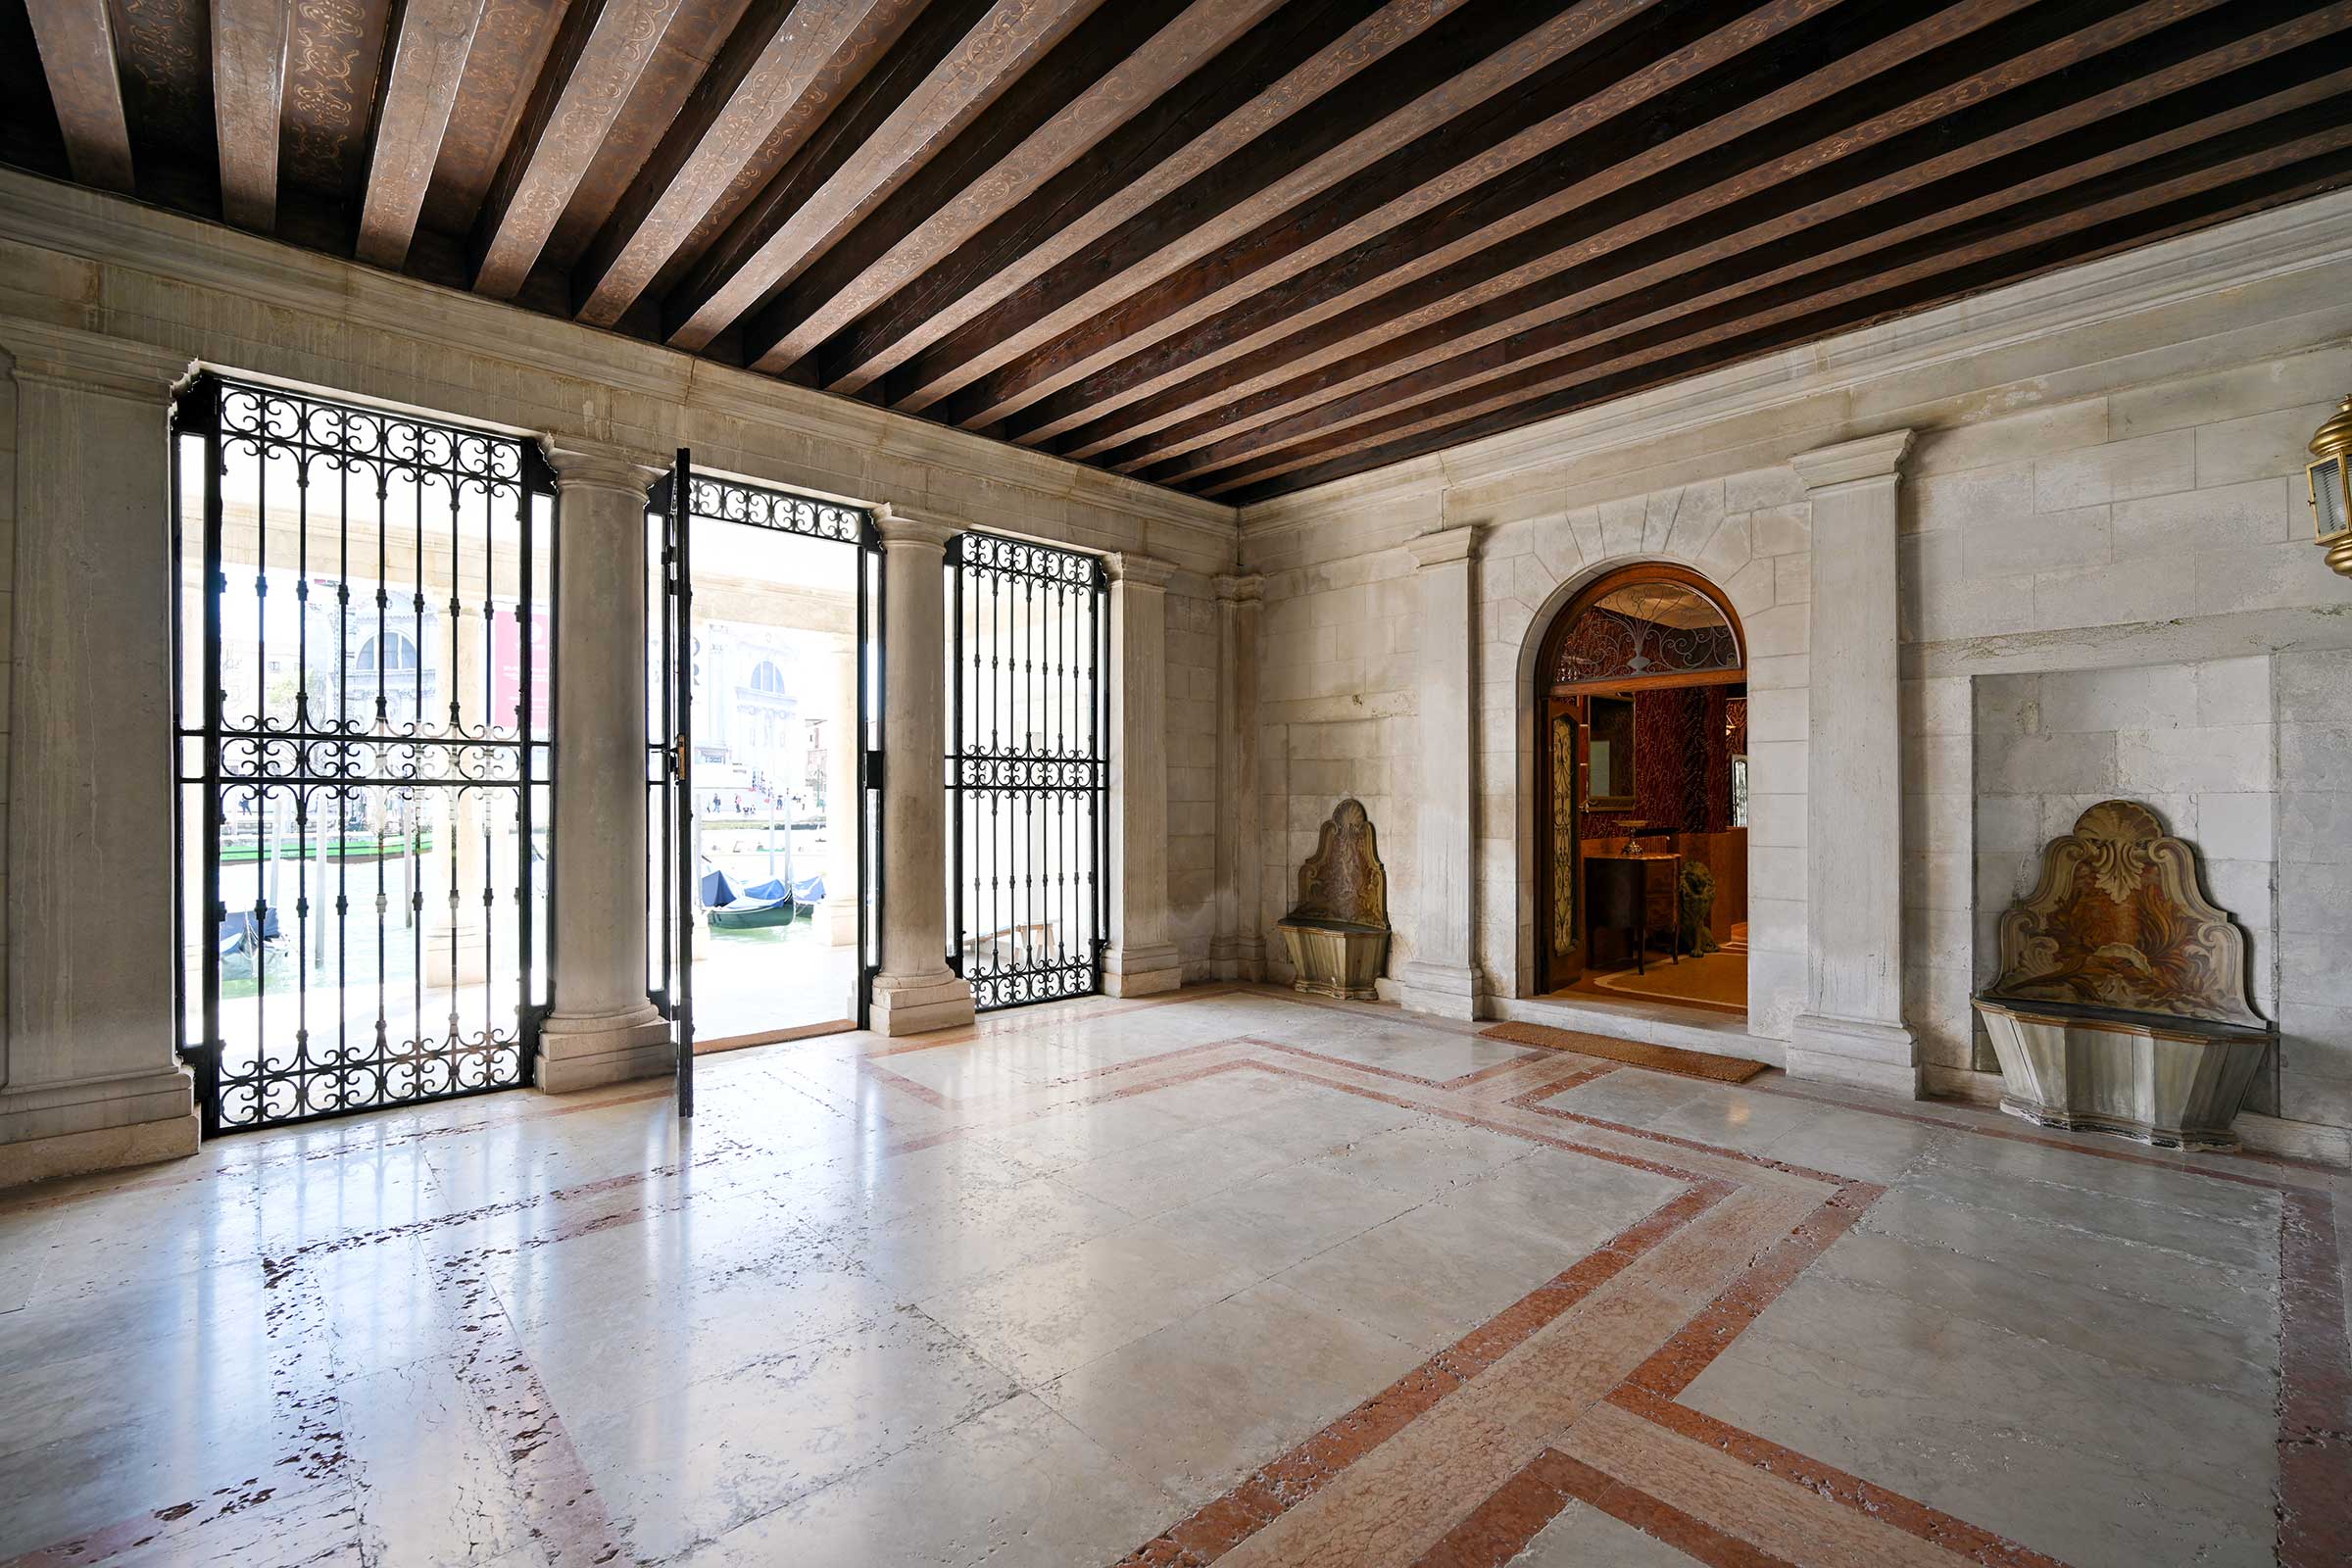 From the communal entrance hall of the Palazzo to the Dogaressa apartment door